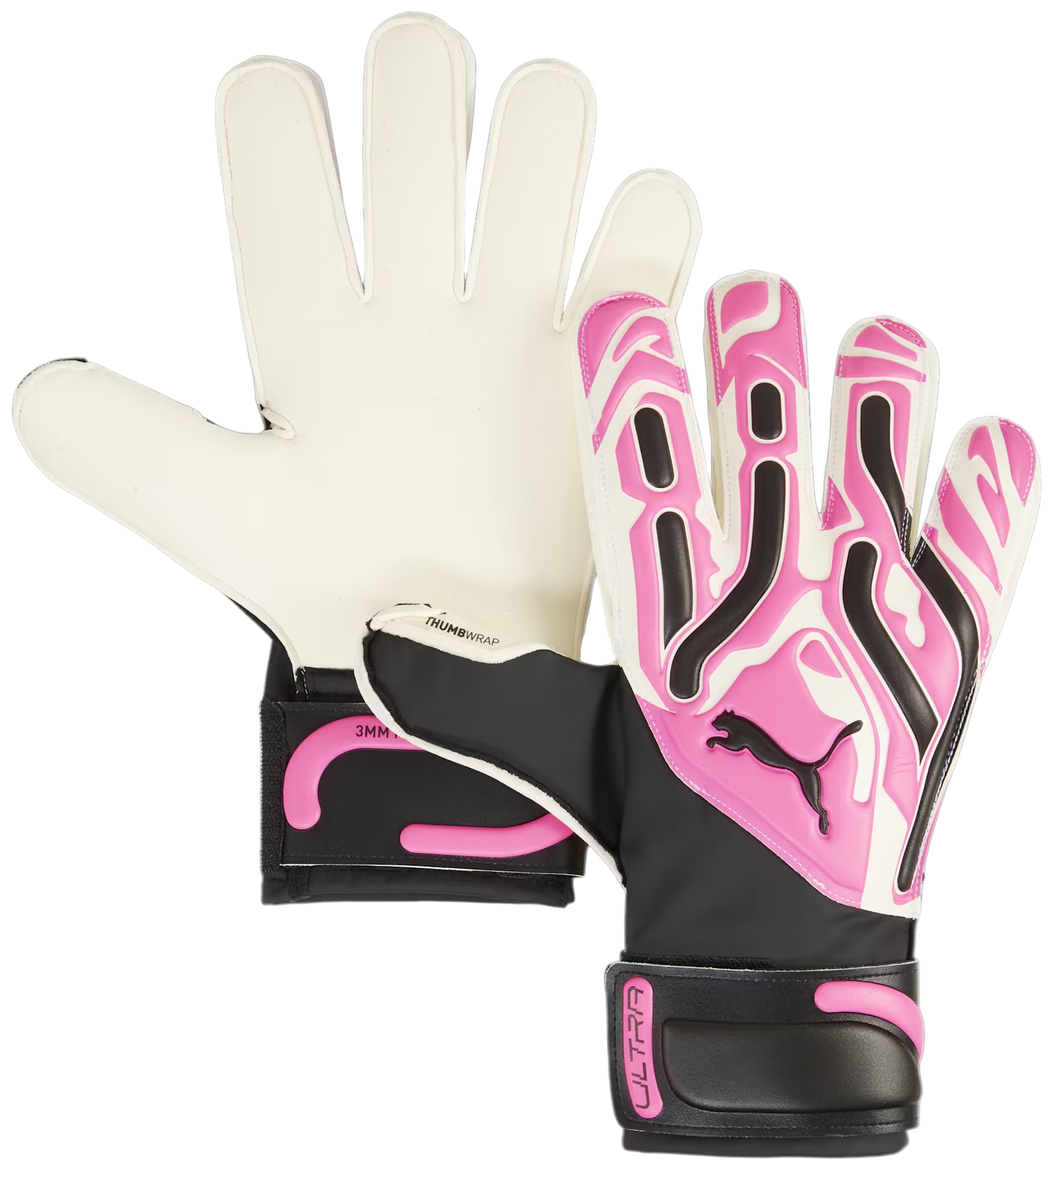 Puma ULTRA Match Protect RC Goalkeeper Gloves 041864 08 Poison Pink/White/Black